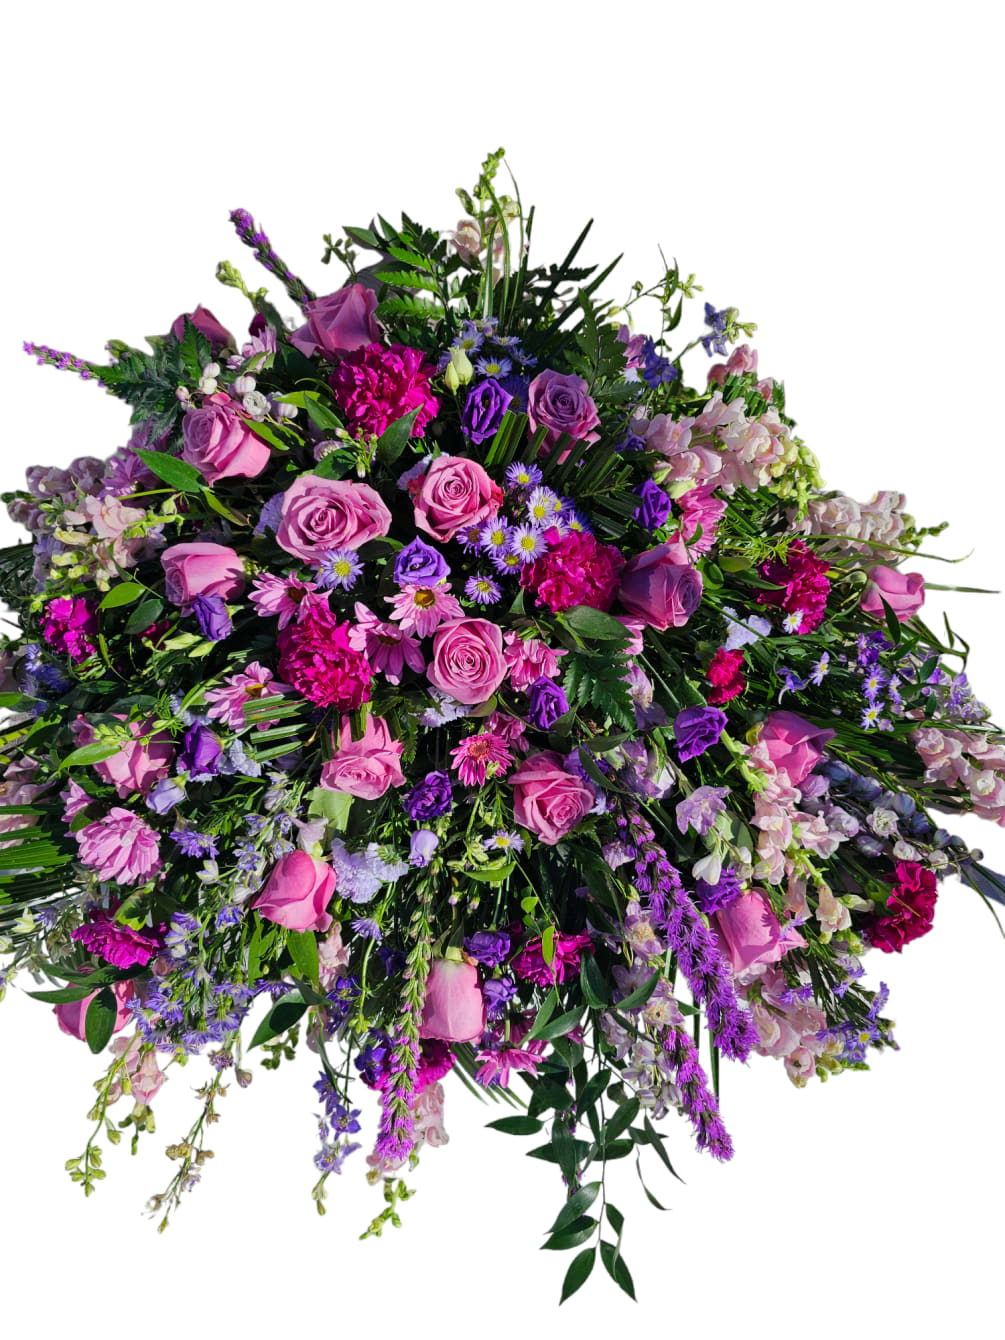 A beautiful tribute to your loved one using pink and purple flowers.